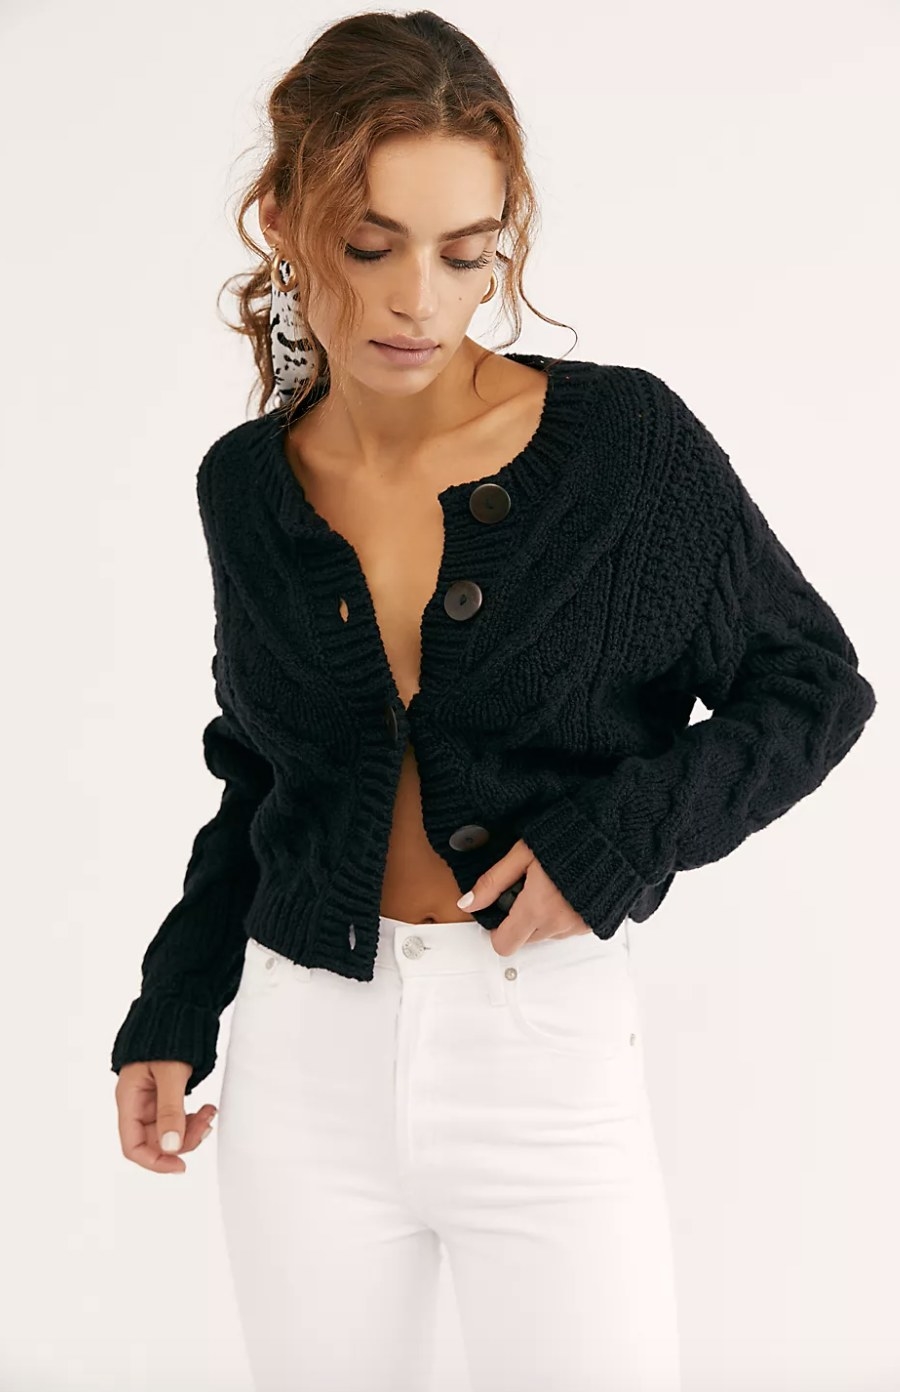 the cardigan in black paired with white jeans